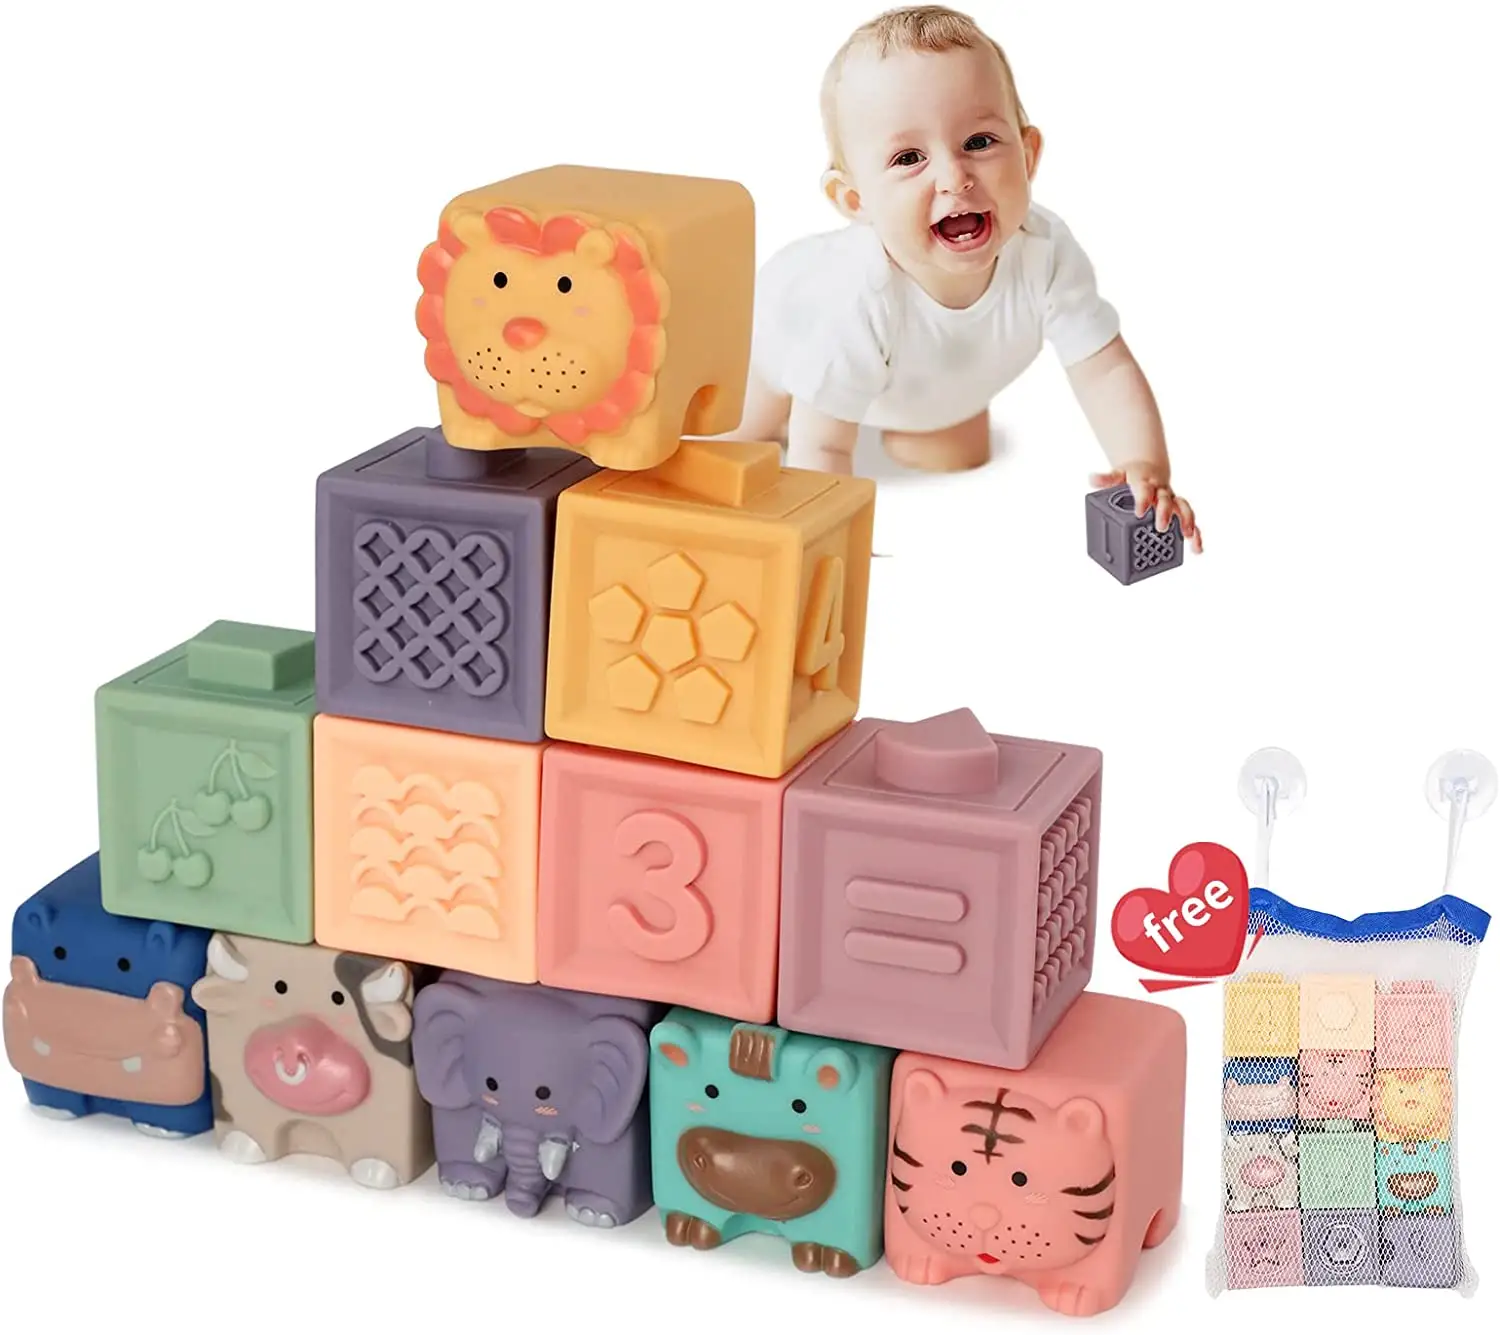 Newly Designed Stacking Toy Silicone Baby Children Kids Educational Stack Toys Colorful Unisex Silicon Building Block Sets